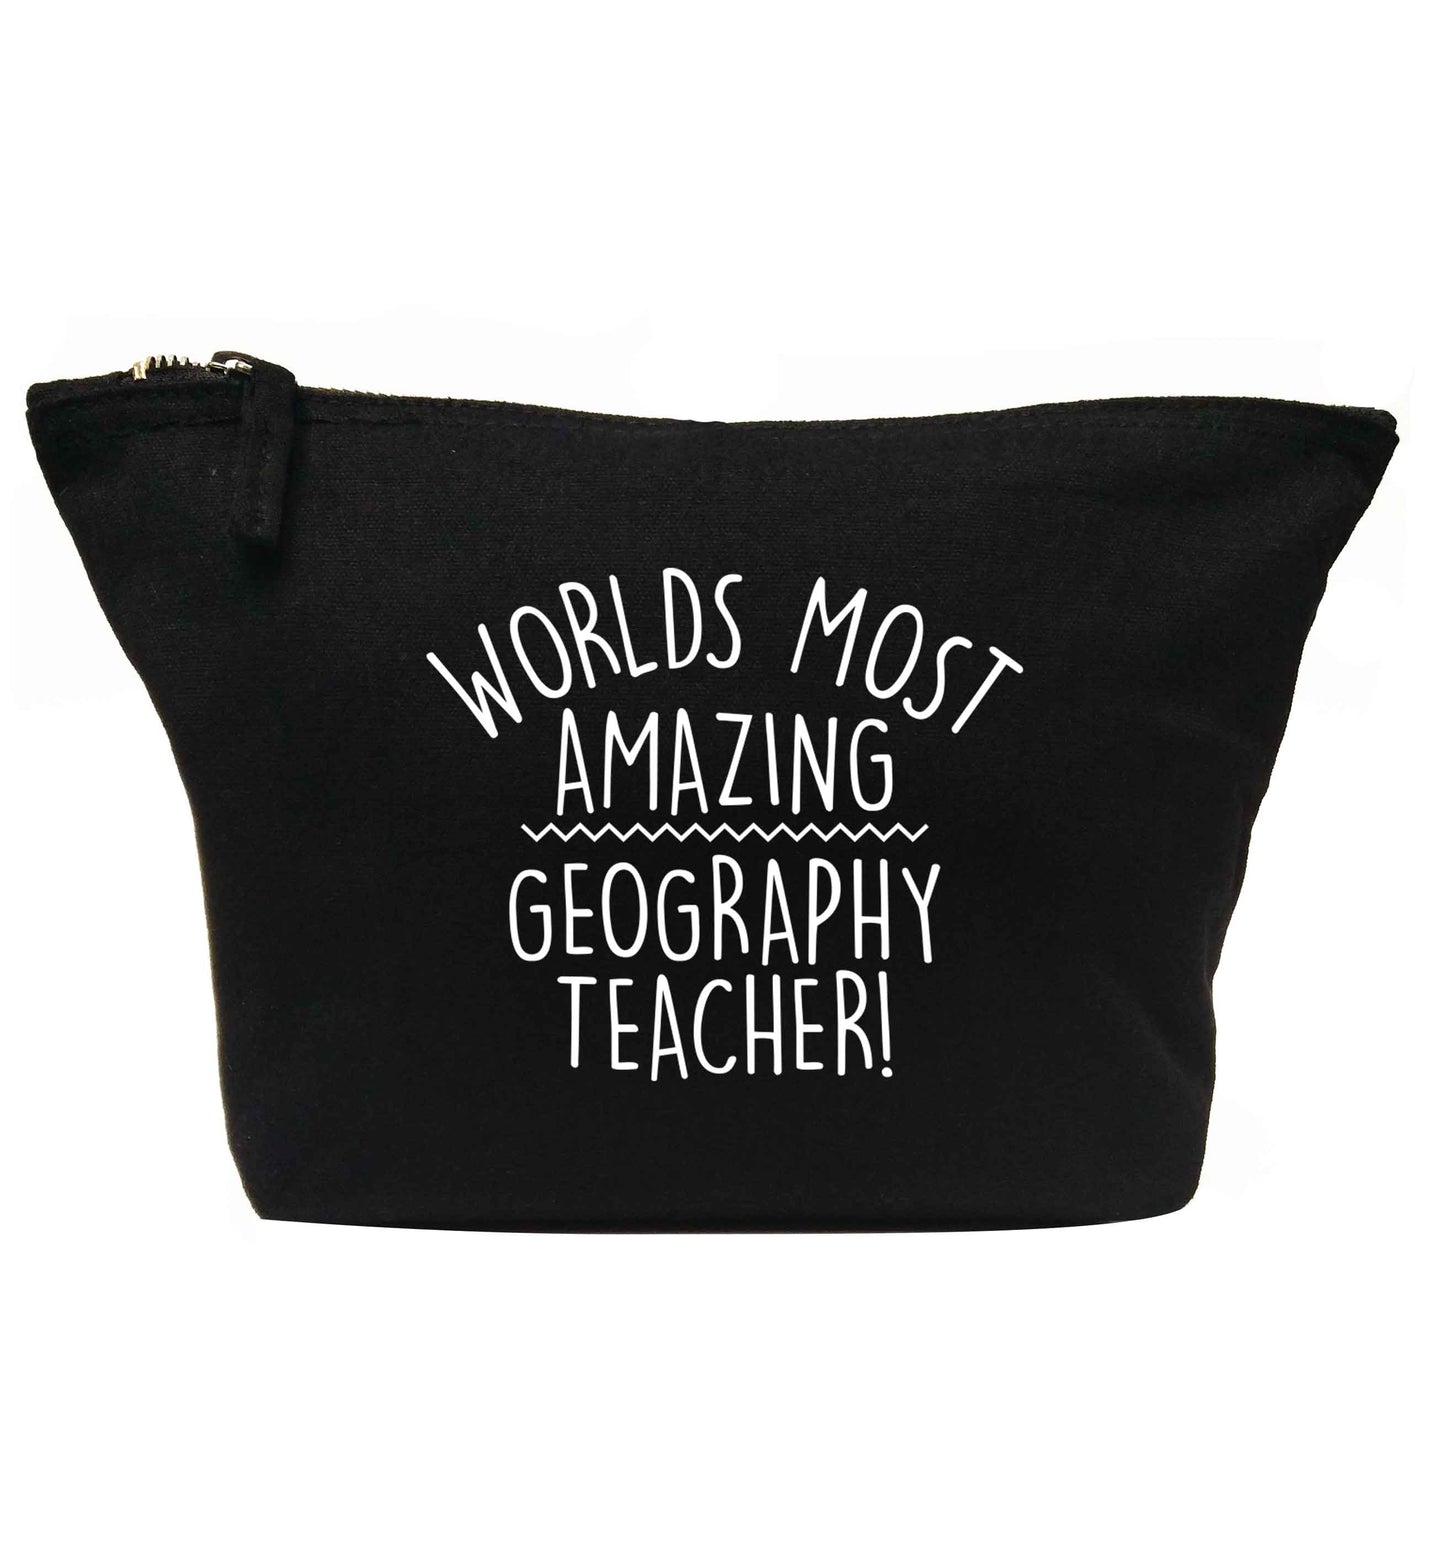 Worlds most amazing geography teacher | Makeup / wash bag